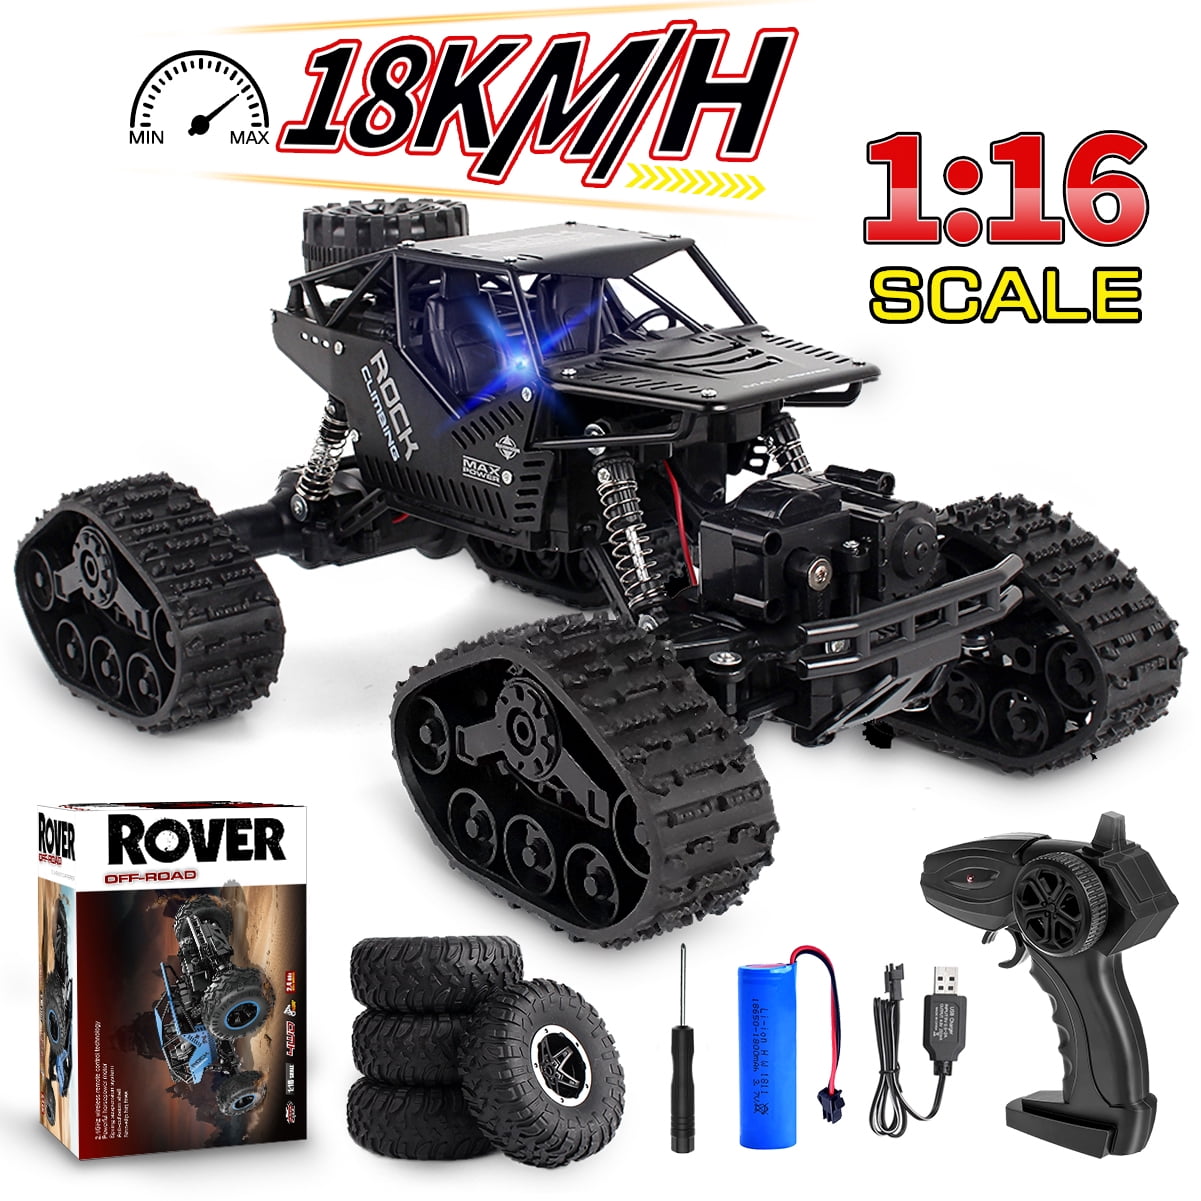 1:16 Scale Remote Control Car,2.4 GHz RC Drift Race Car, 4WD High Speed 18  Km/h All Terrains Electric Toy Off Road RC Monster Vehicle Truck Crawler